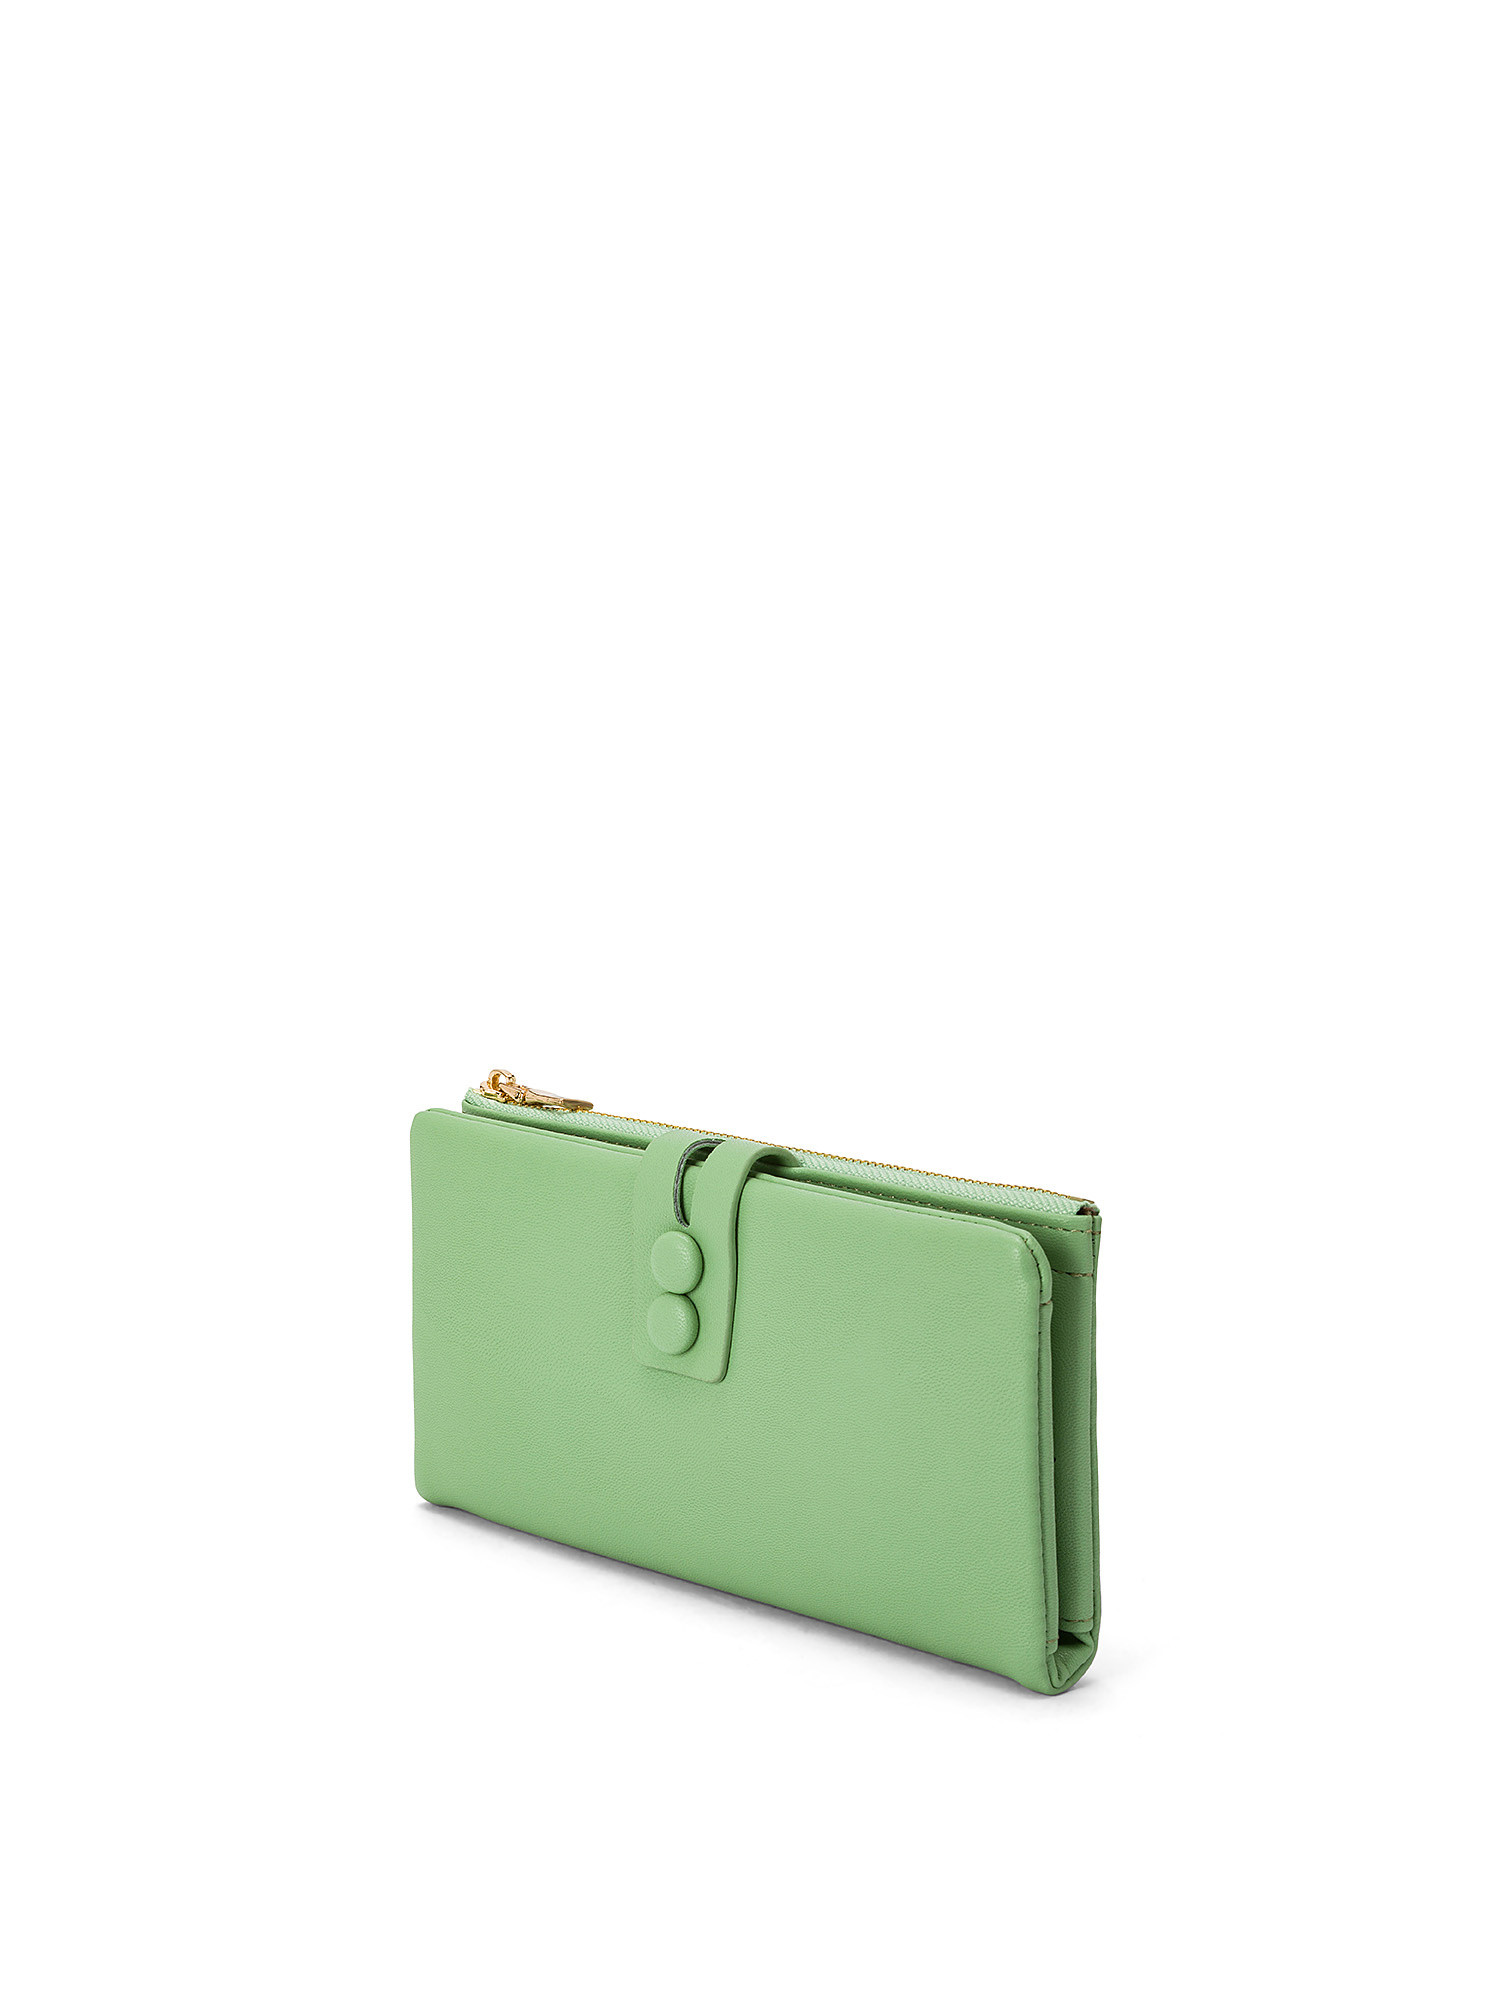 Koan - Faux leather wallet with motif, Light Green, large image number 1